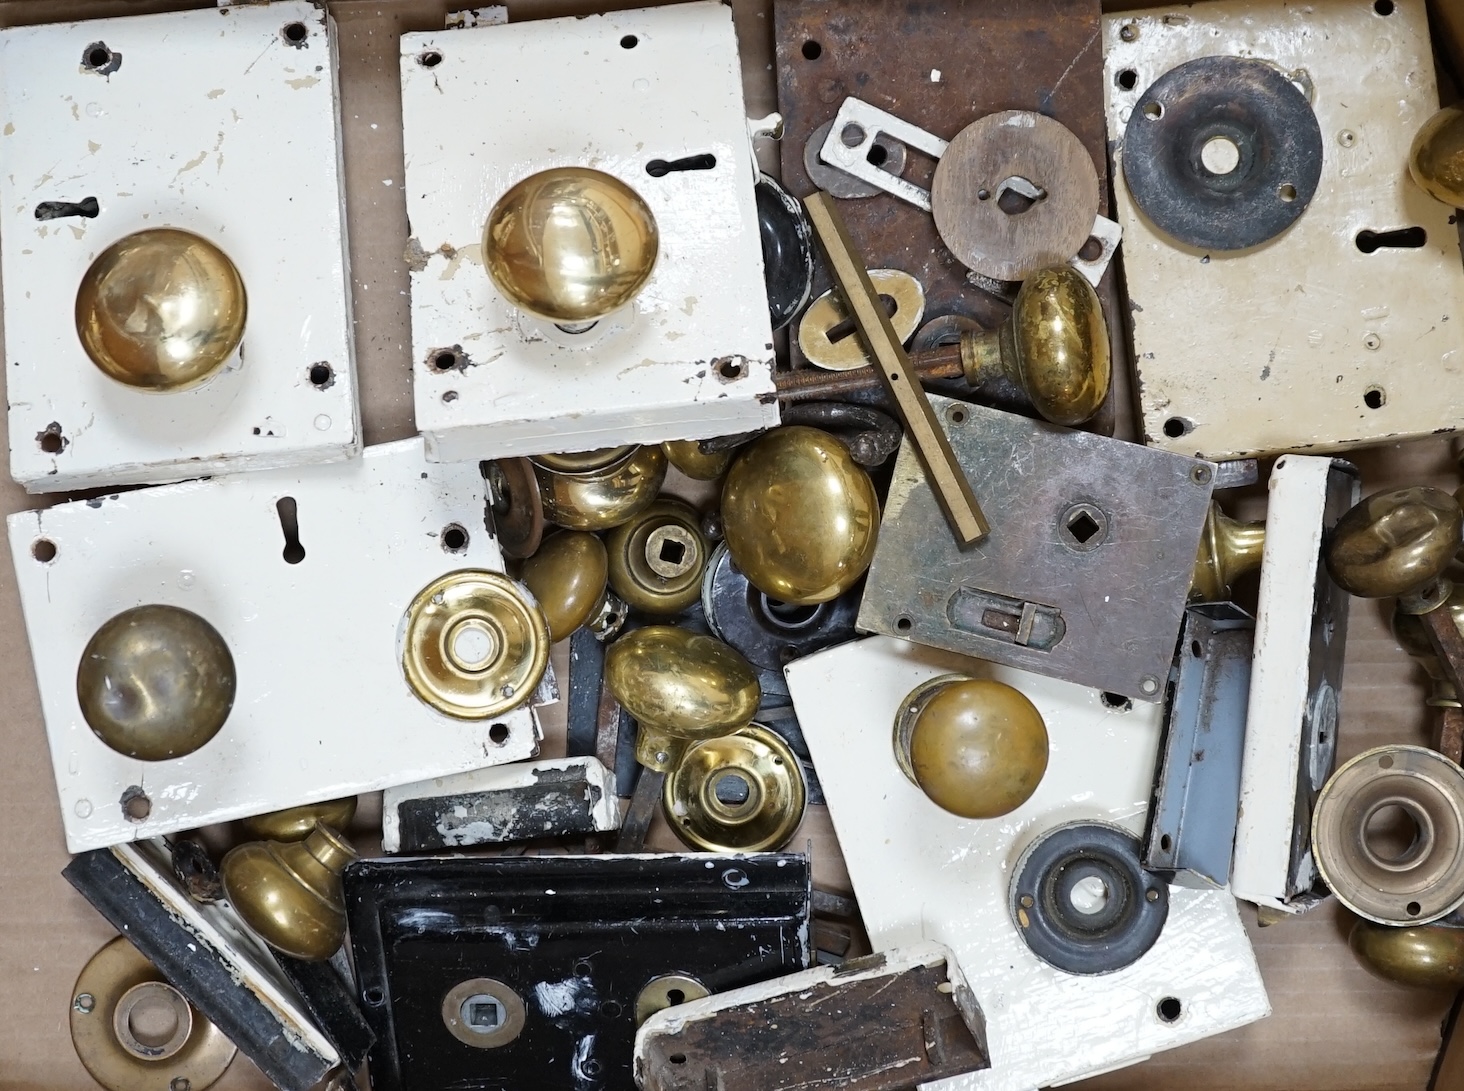 A collection of door locks and brass knobs